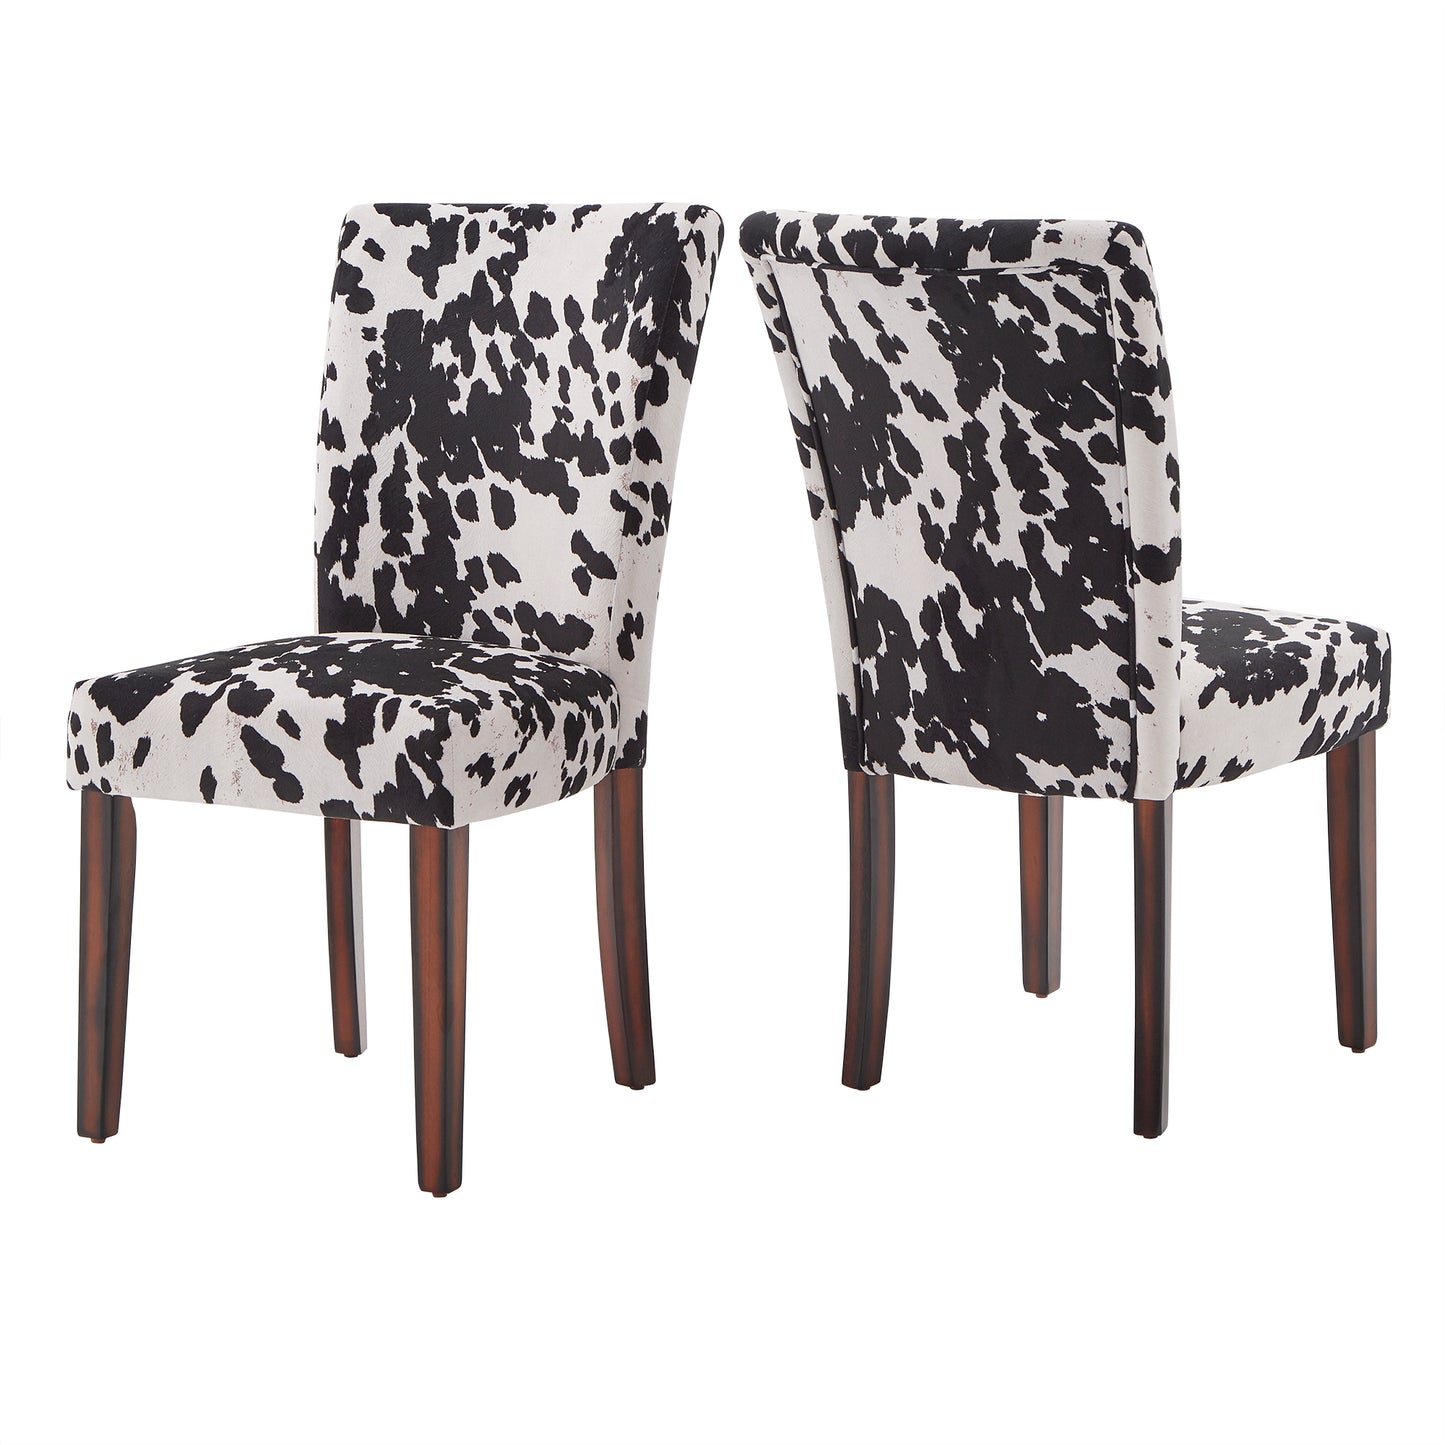 Cowhide Parsons Dining Chairs (Set of 2) - Espresso Finish, Black Cowhide